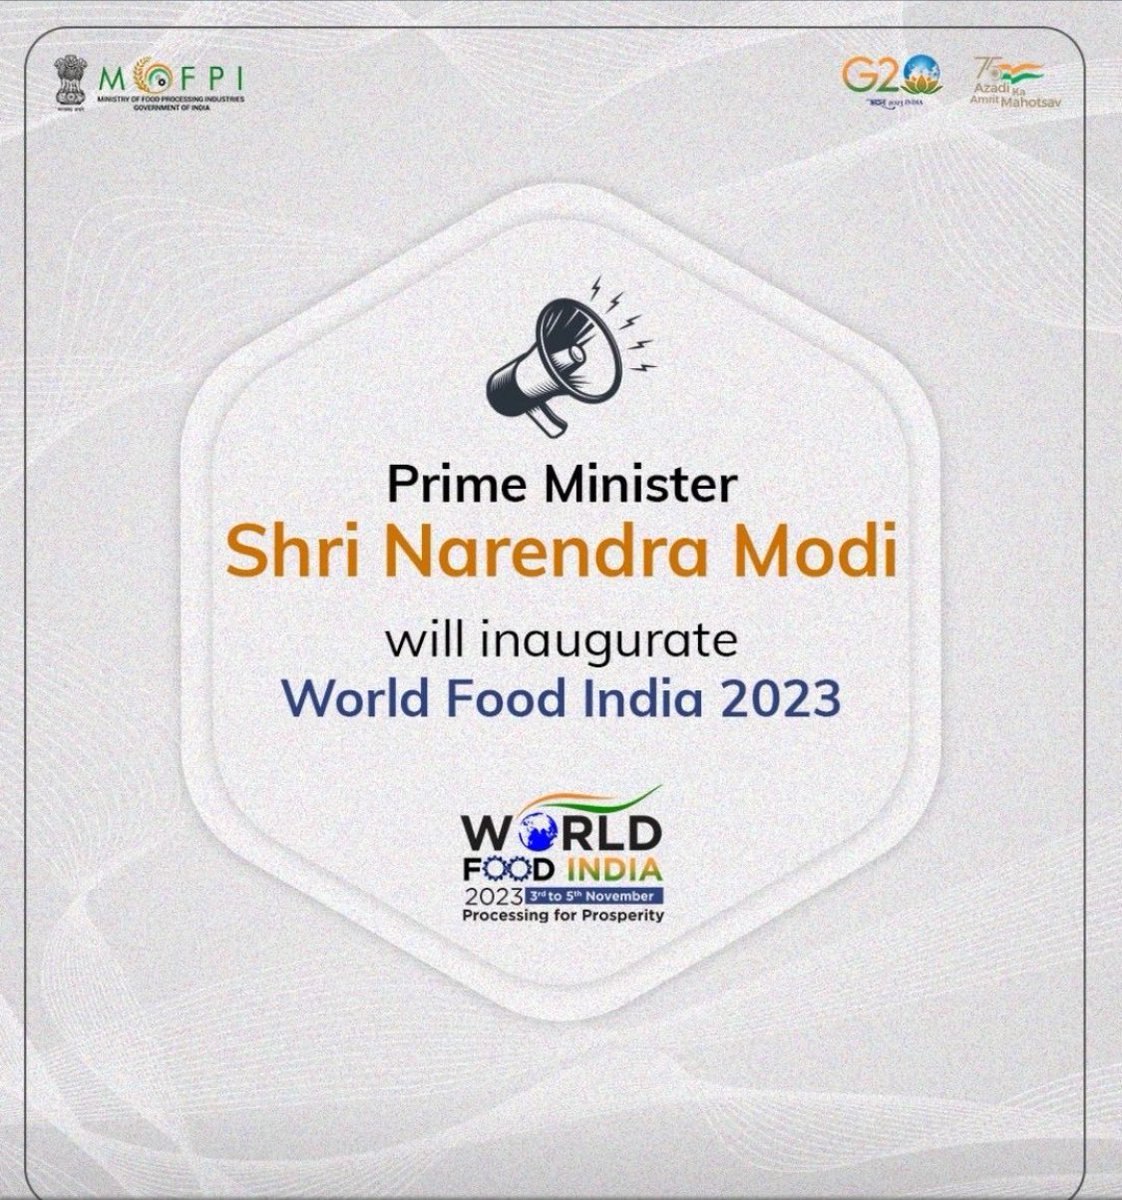 #exhibitions #TRADE_FAIR 
World Food India to be inaugurated by Honb PM Shri Narendra Modi ji. No this exhibition isn’t managed by EXHICON but shared here to let us all know the importance of the TradeFairs in India